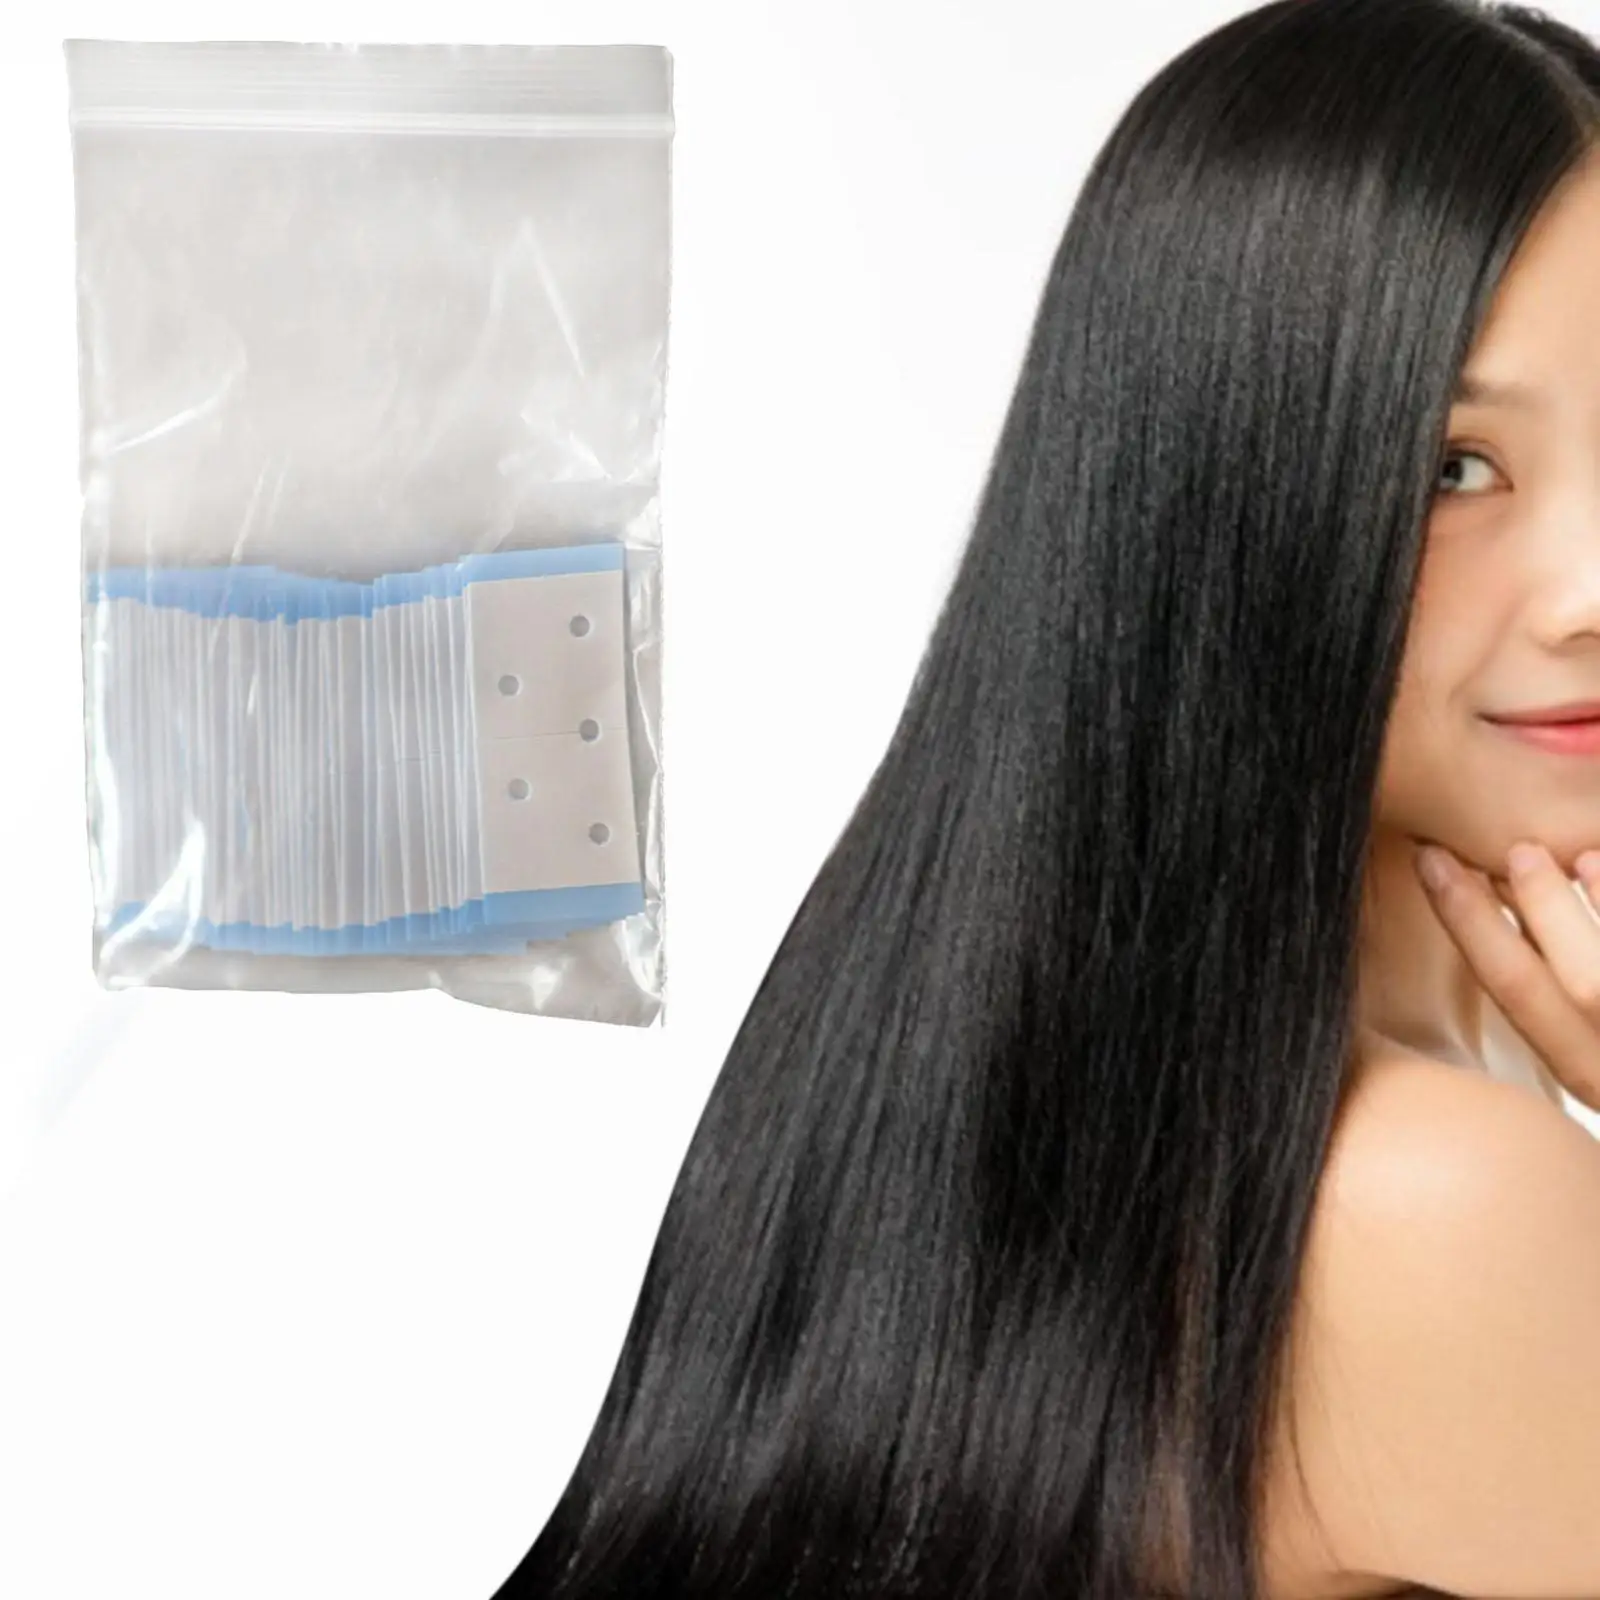 40 Pieces Hair Extension Tape Replacement Double Sided Adhesive Tapes for Home Hair Shop